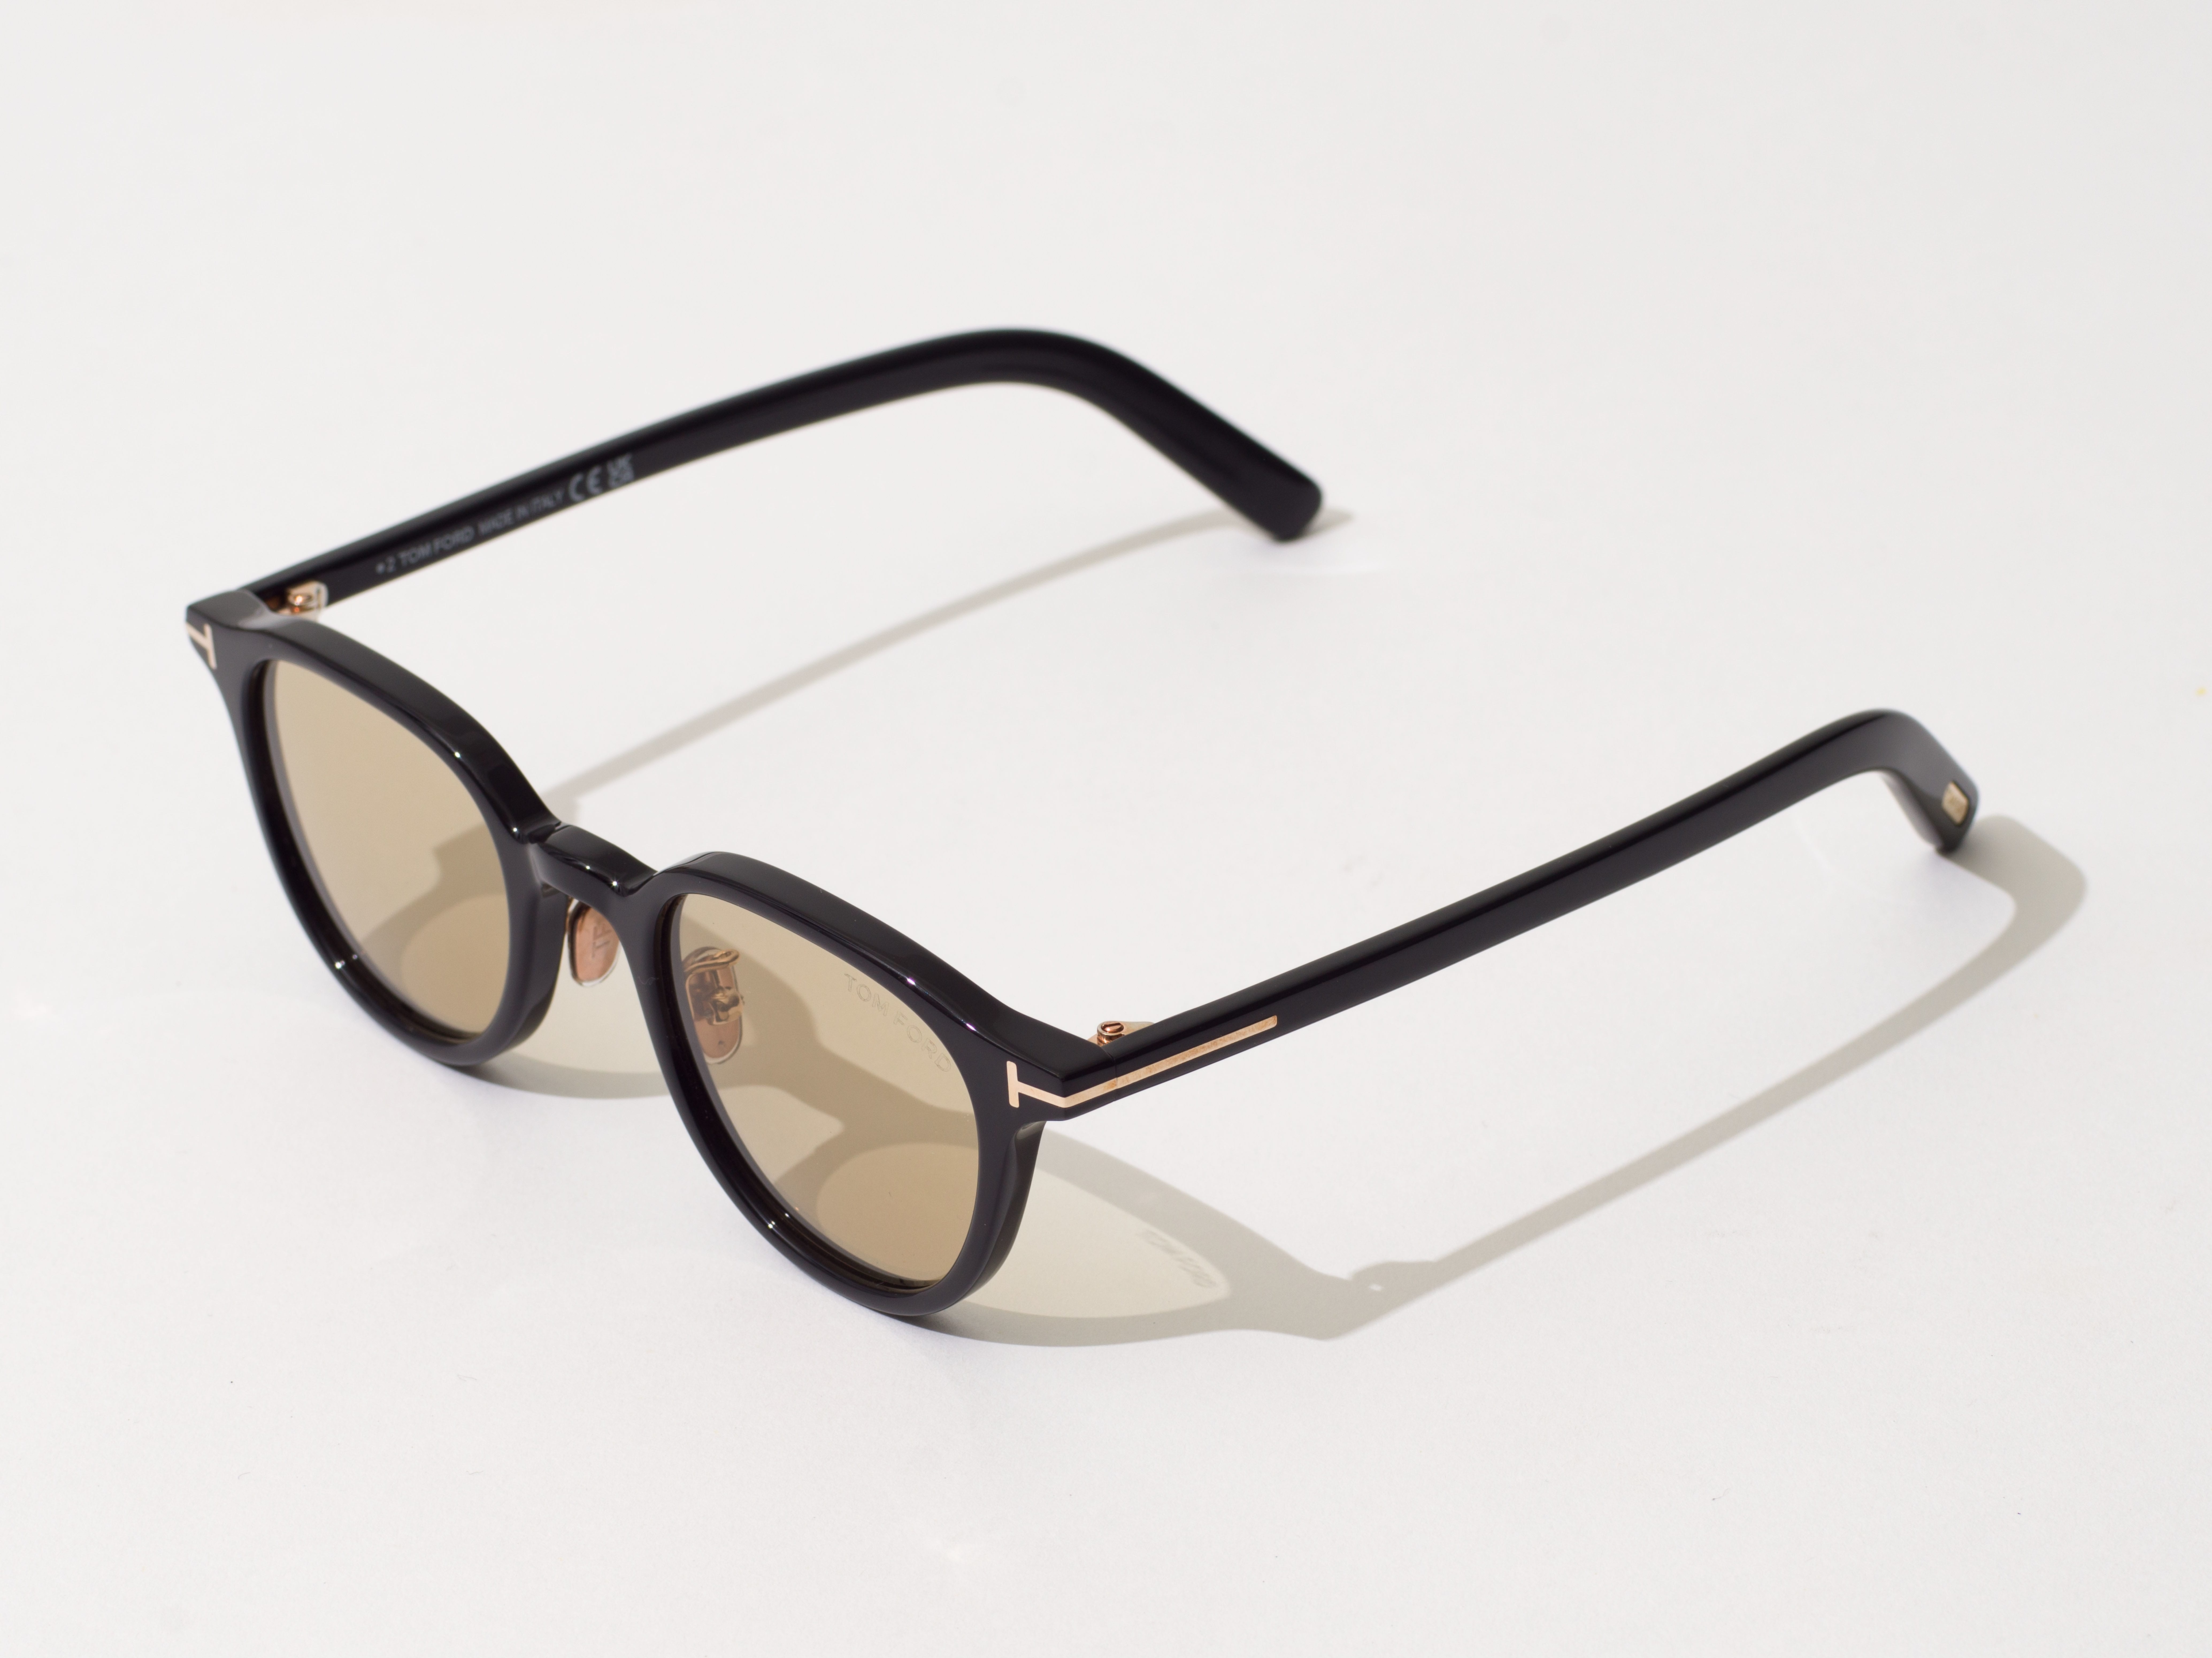 TOM FORD EYEWEAR Exclusive for Ron Herman 12.10(Sat) New Arrival